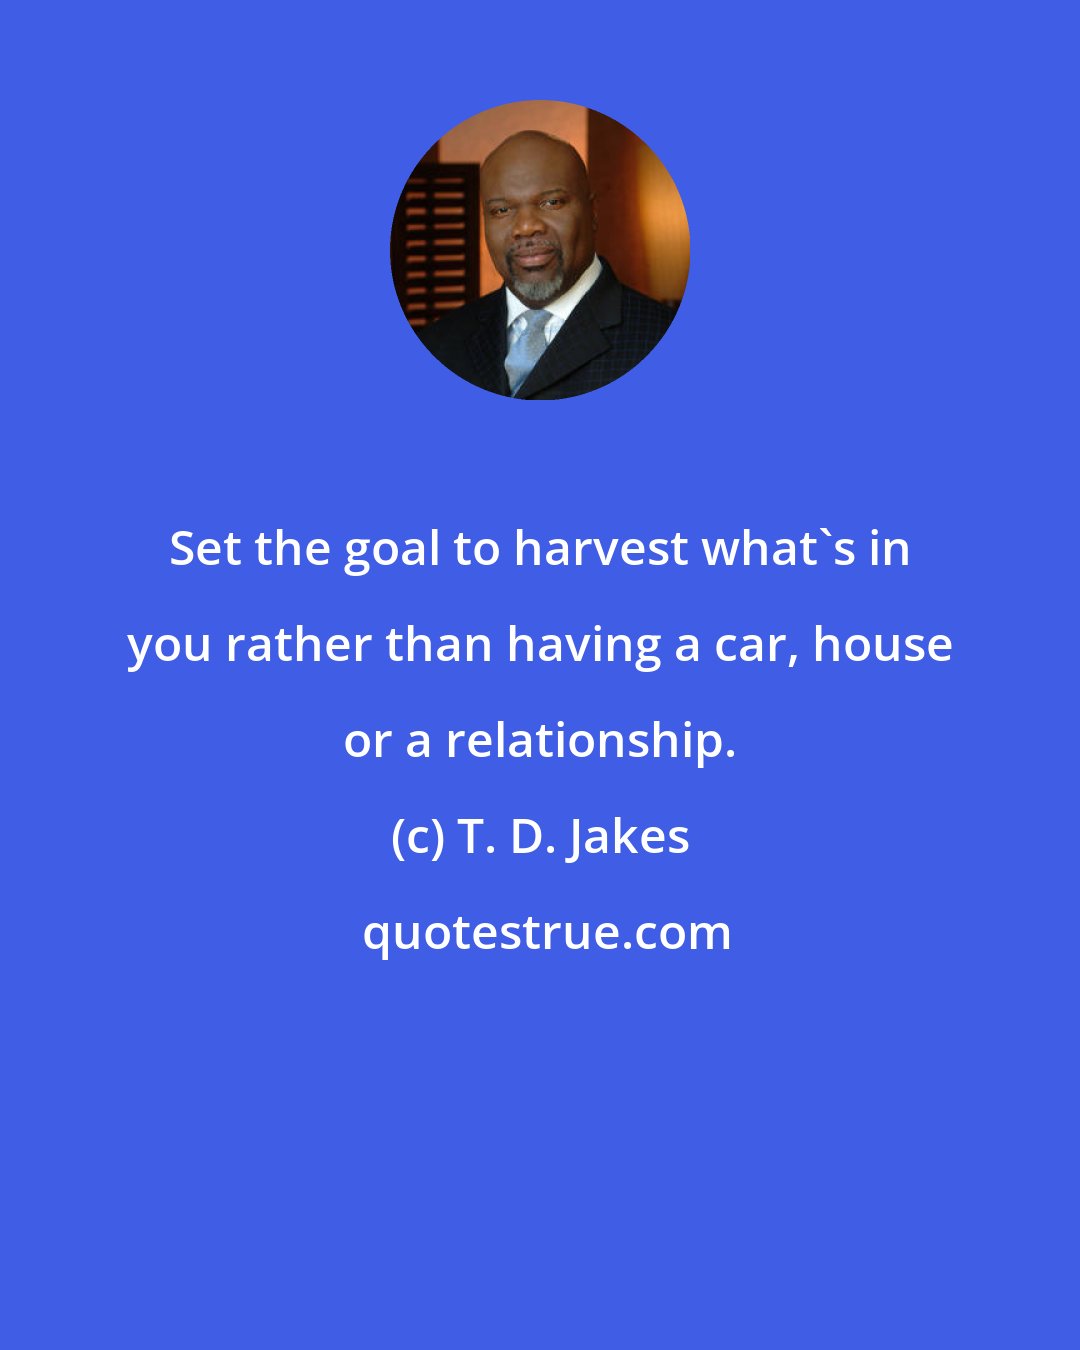 T. D. Jakes: Set the goal to harvest what's in you rather than having a car, house or a relationship.